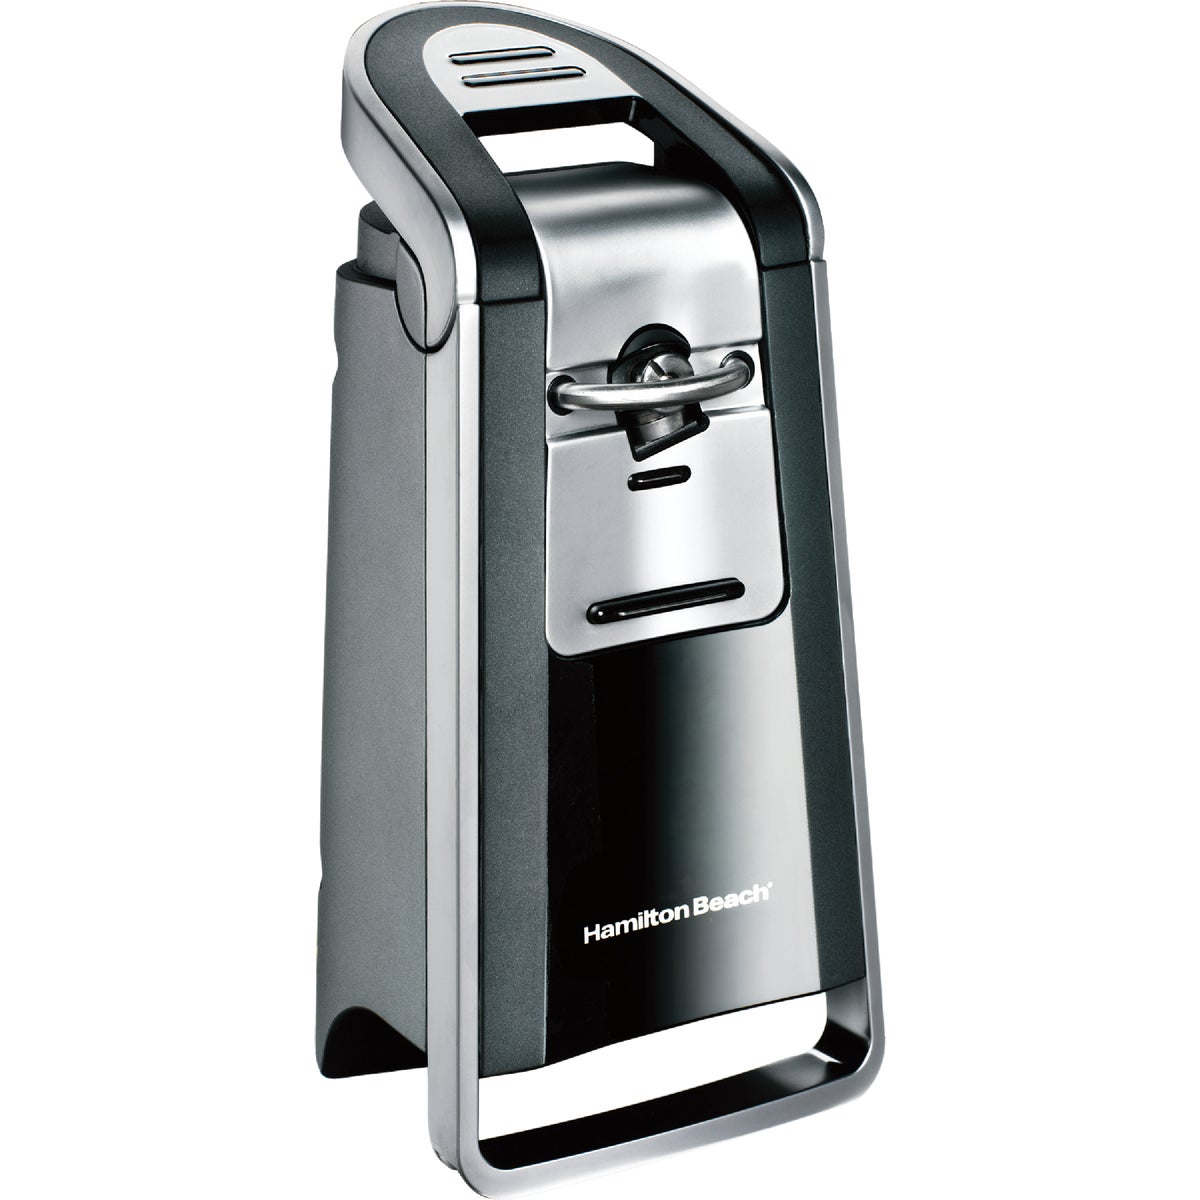 Hamilton Beach Smooth Touch Chrome Electric Can Opener